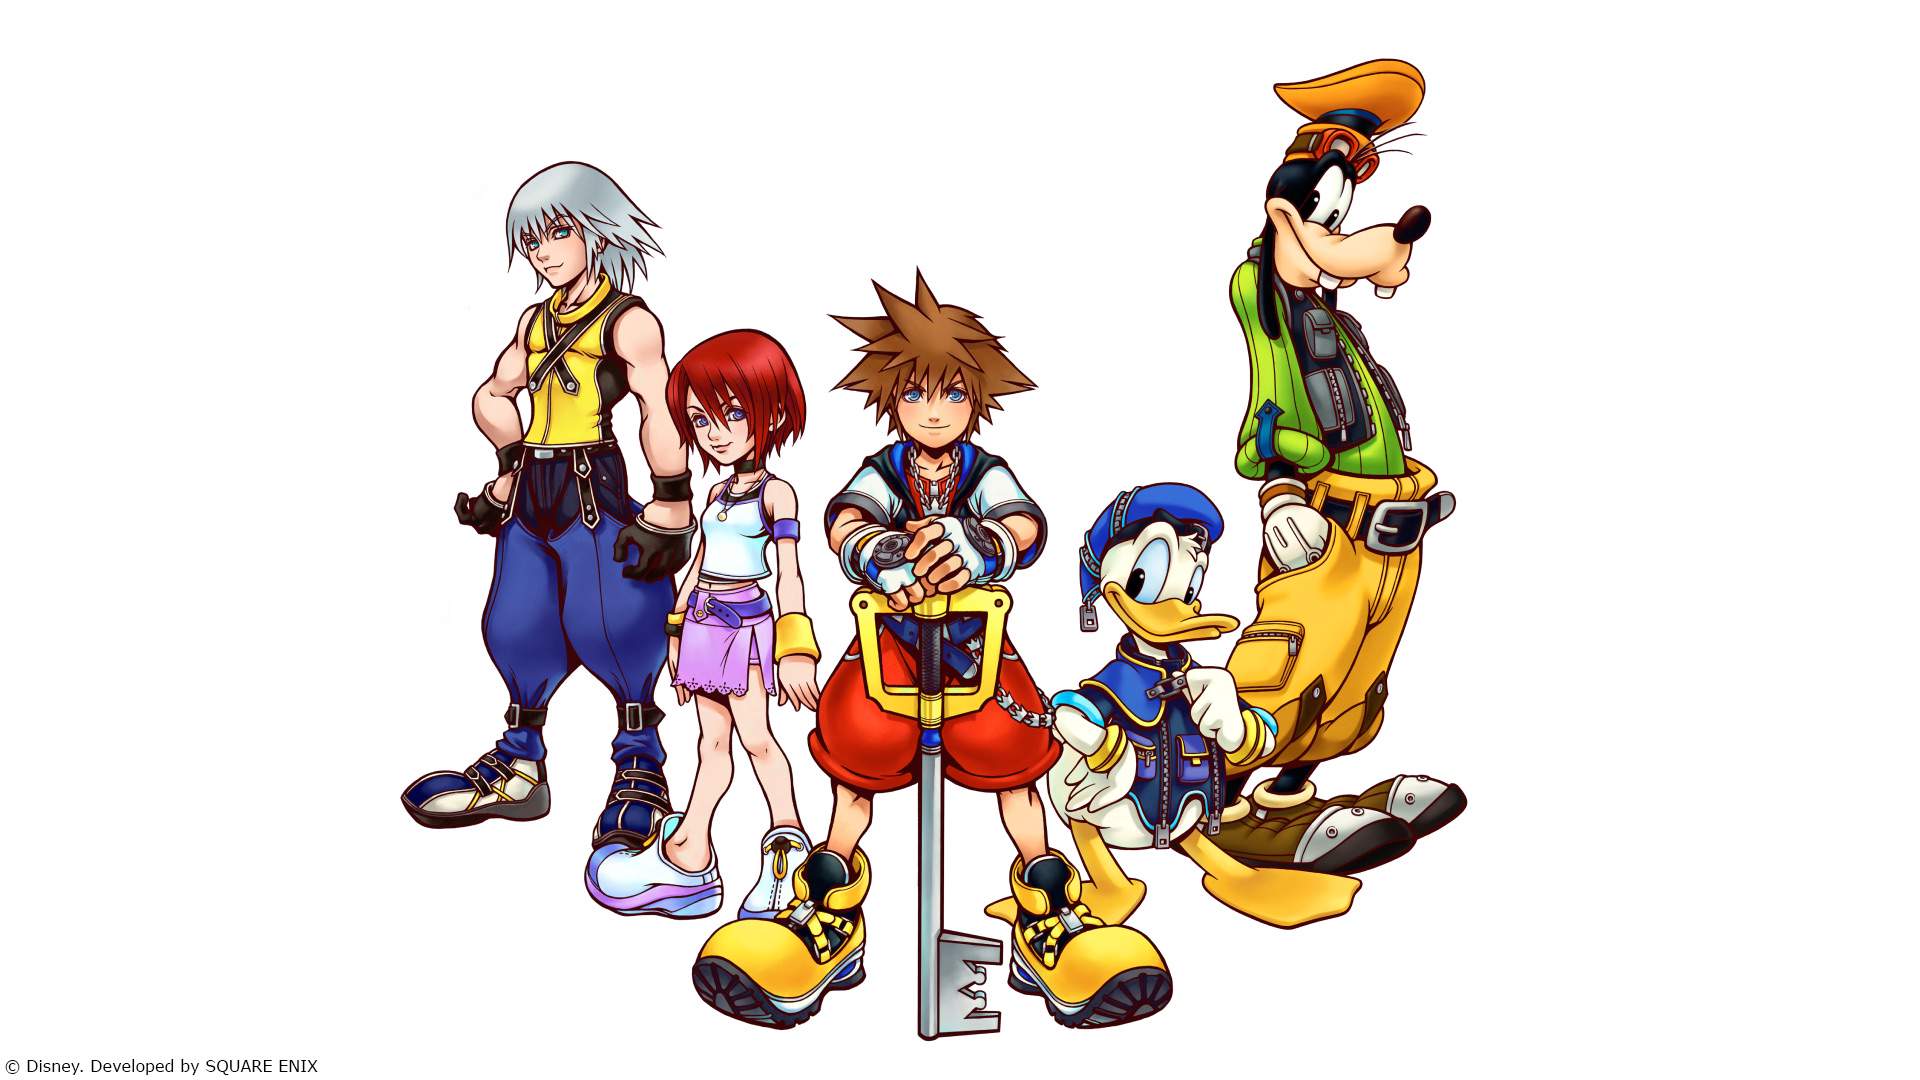 Which KINGDOM HEARTS game should I play first?